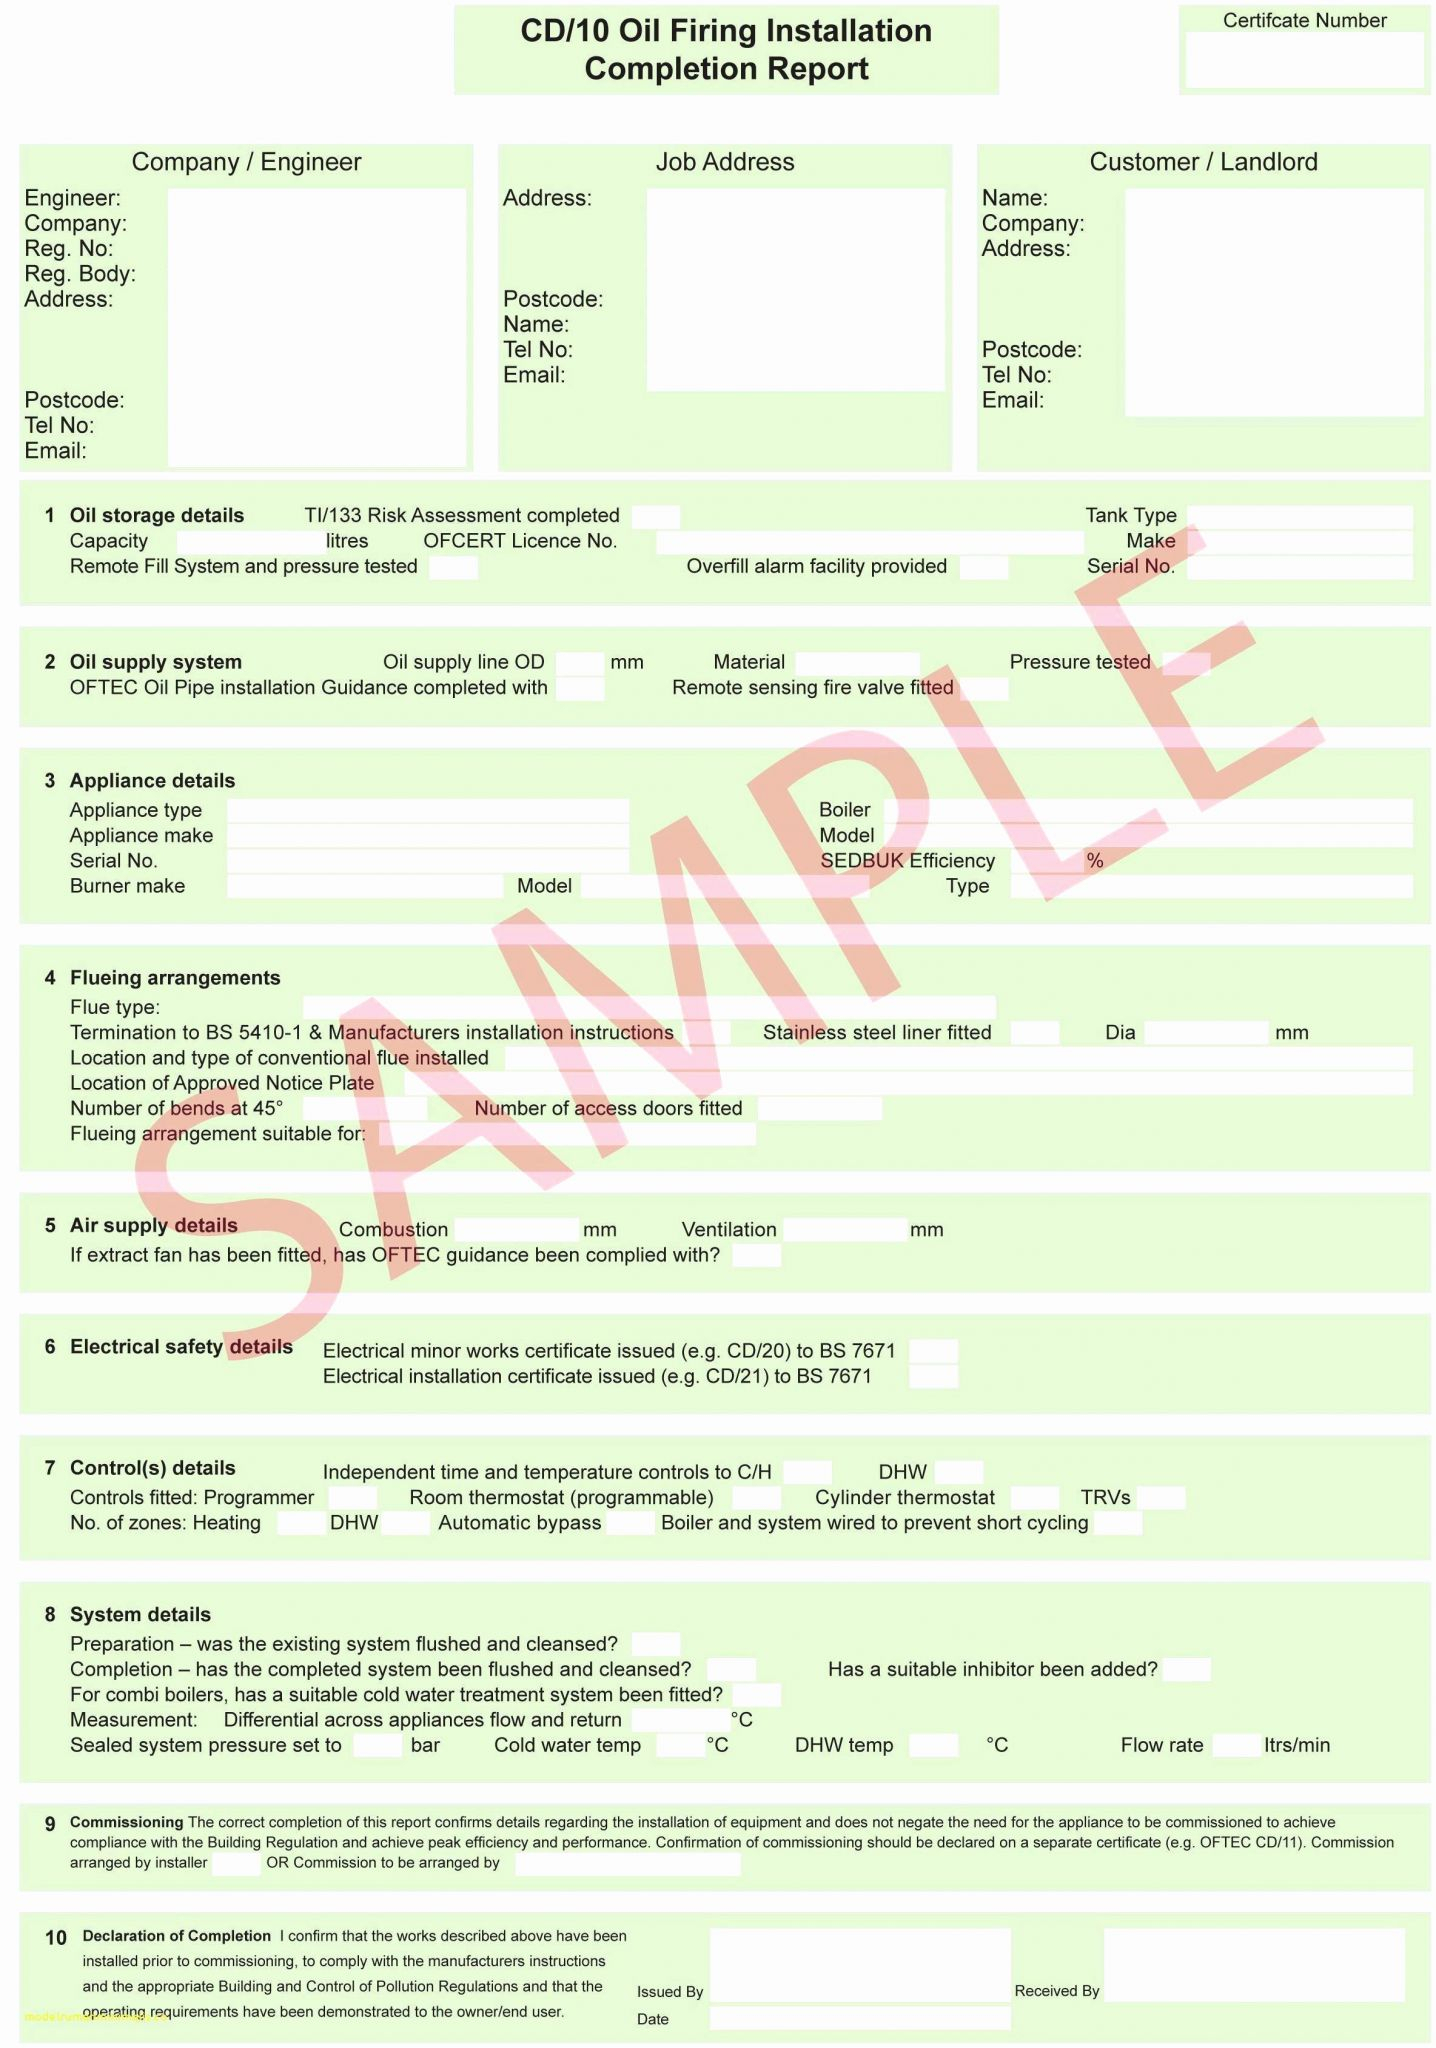 Birth Certificate Template | Lera Mera within No Certificate Templates Could Be Found